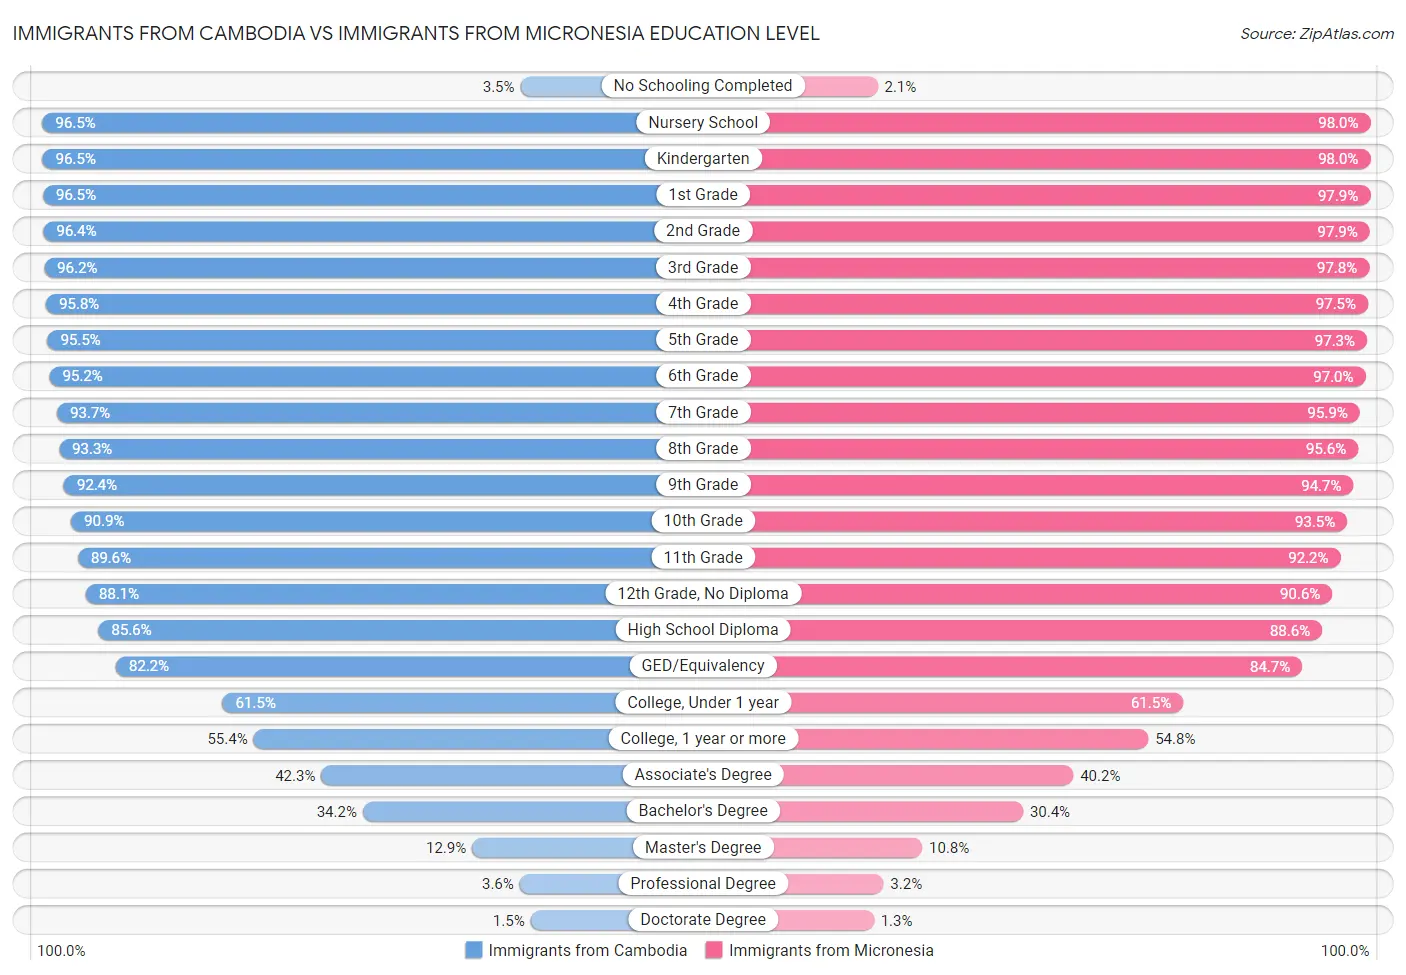 Immigrants from Cambodia vs Immigrants from Micronesia Education Level